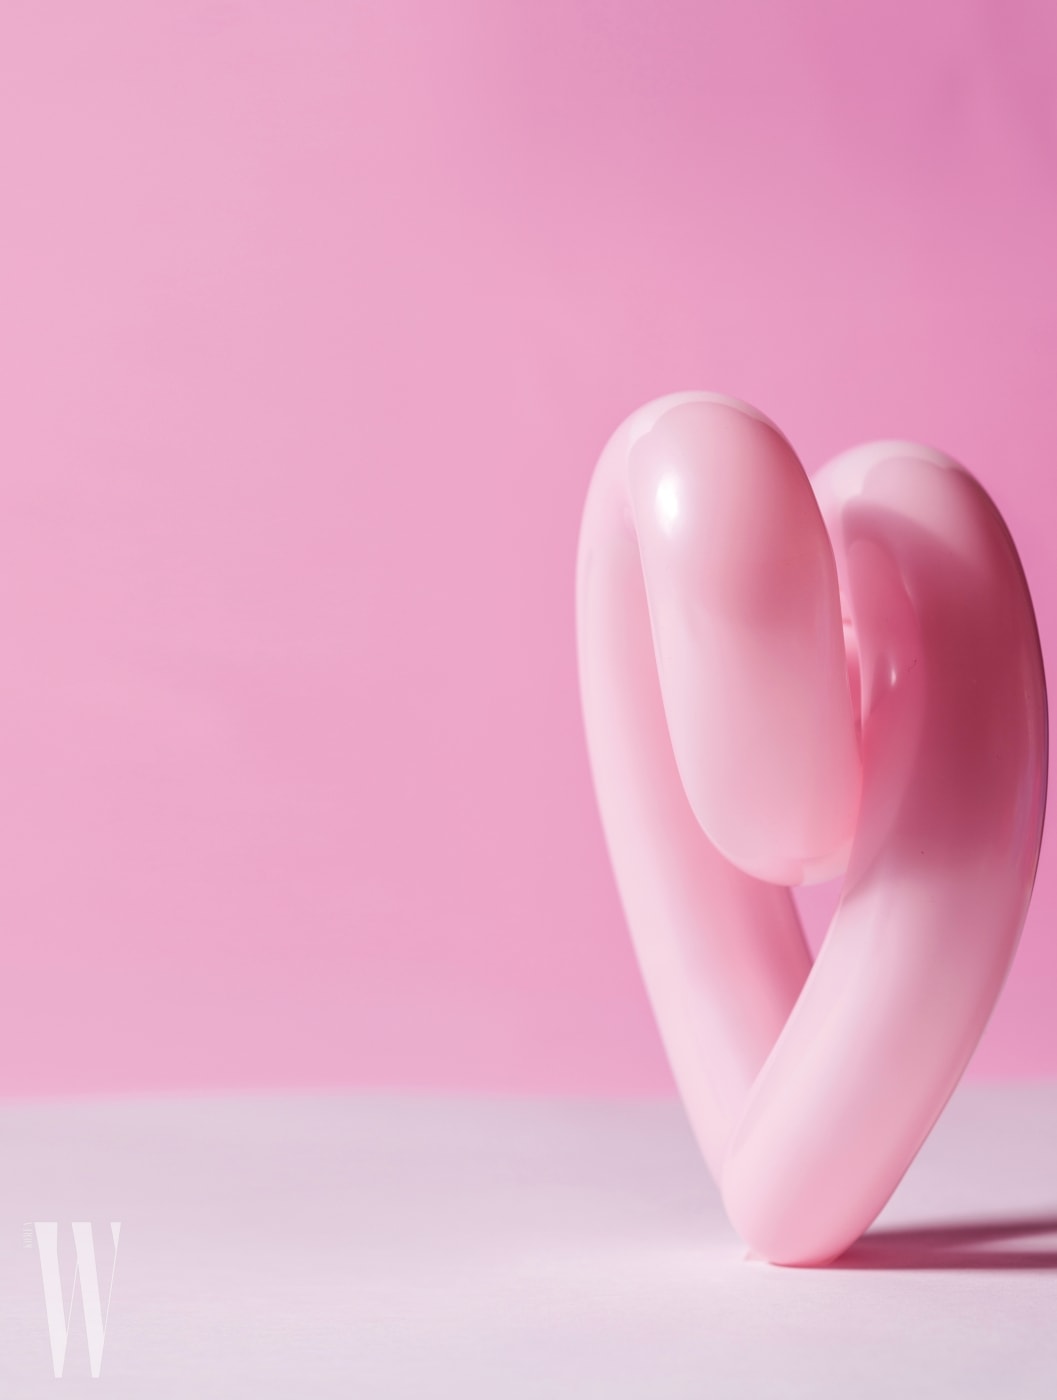 Heart shaped balloon in pink